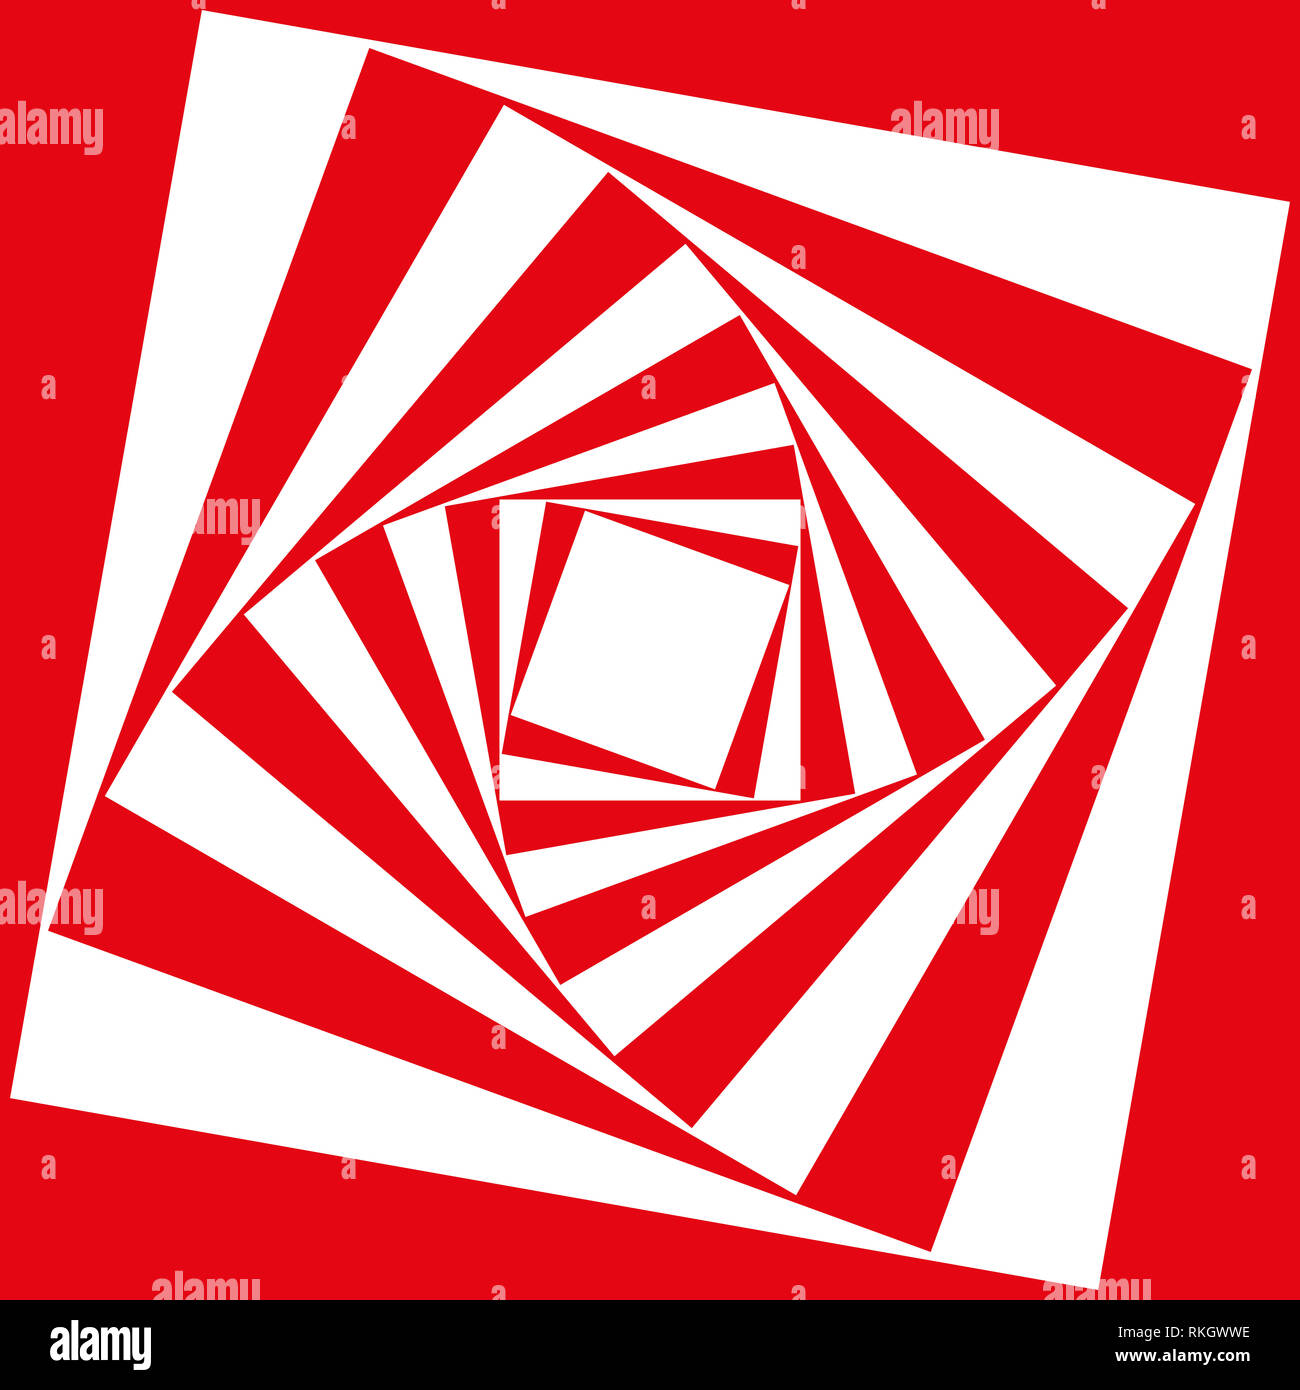 Spiral pattern of staggered squares in red and white as a psychedelic illusion Stock Photo